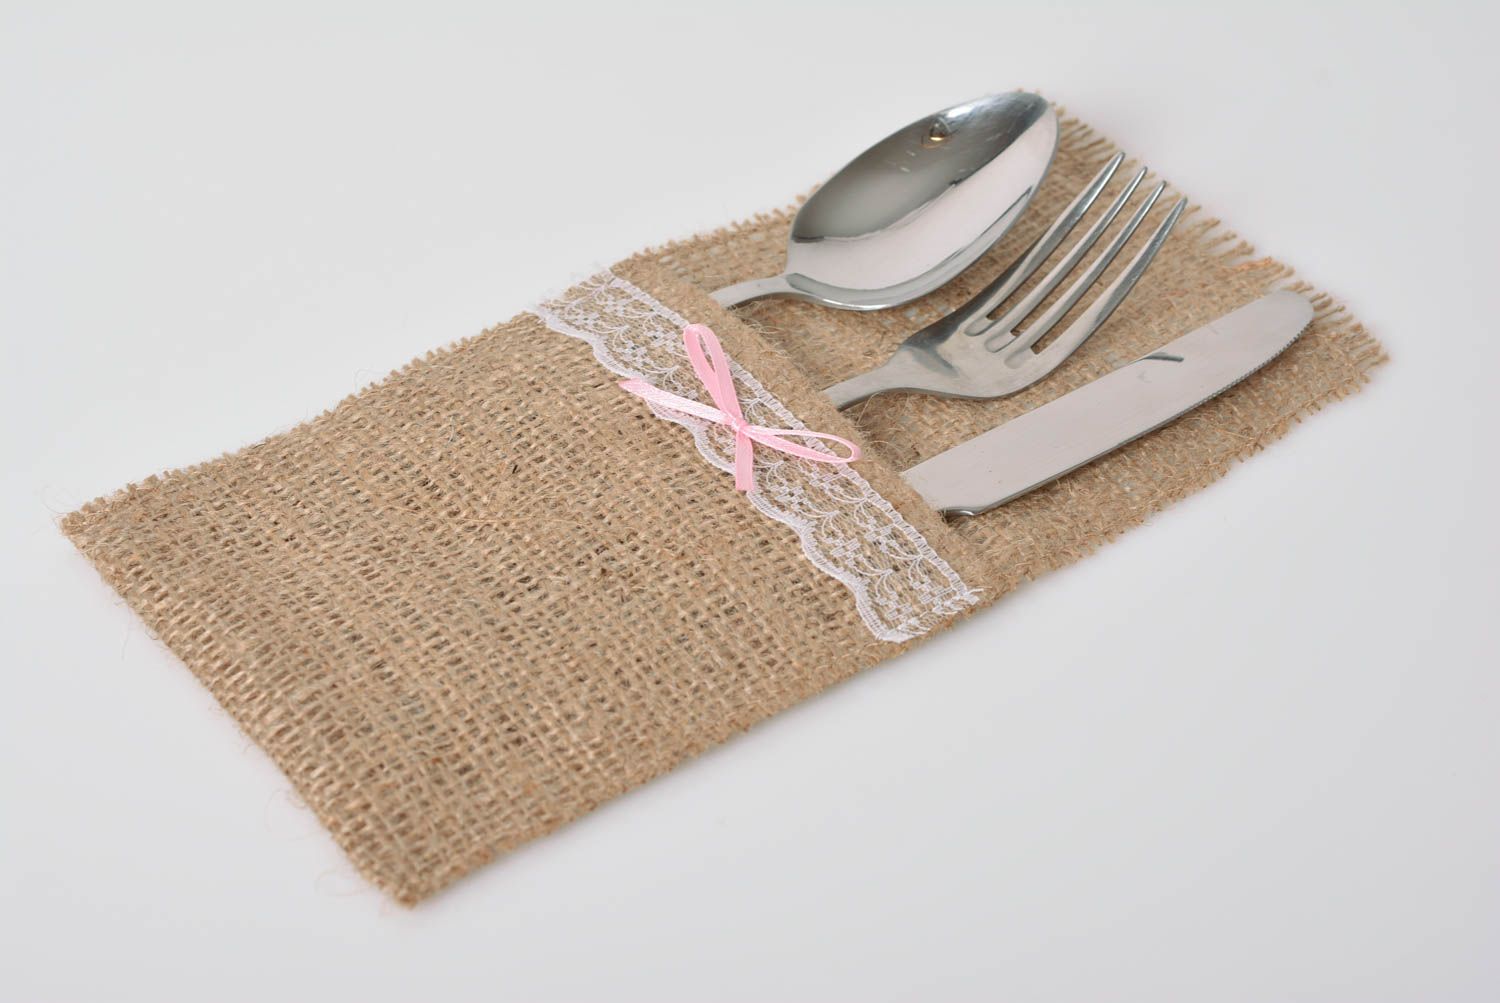 Case for cutlery made of burlap with ribbon beautiful handmade kitchen decor photo 1